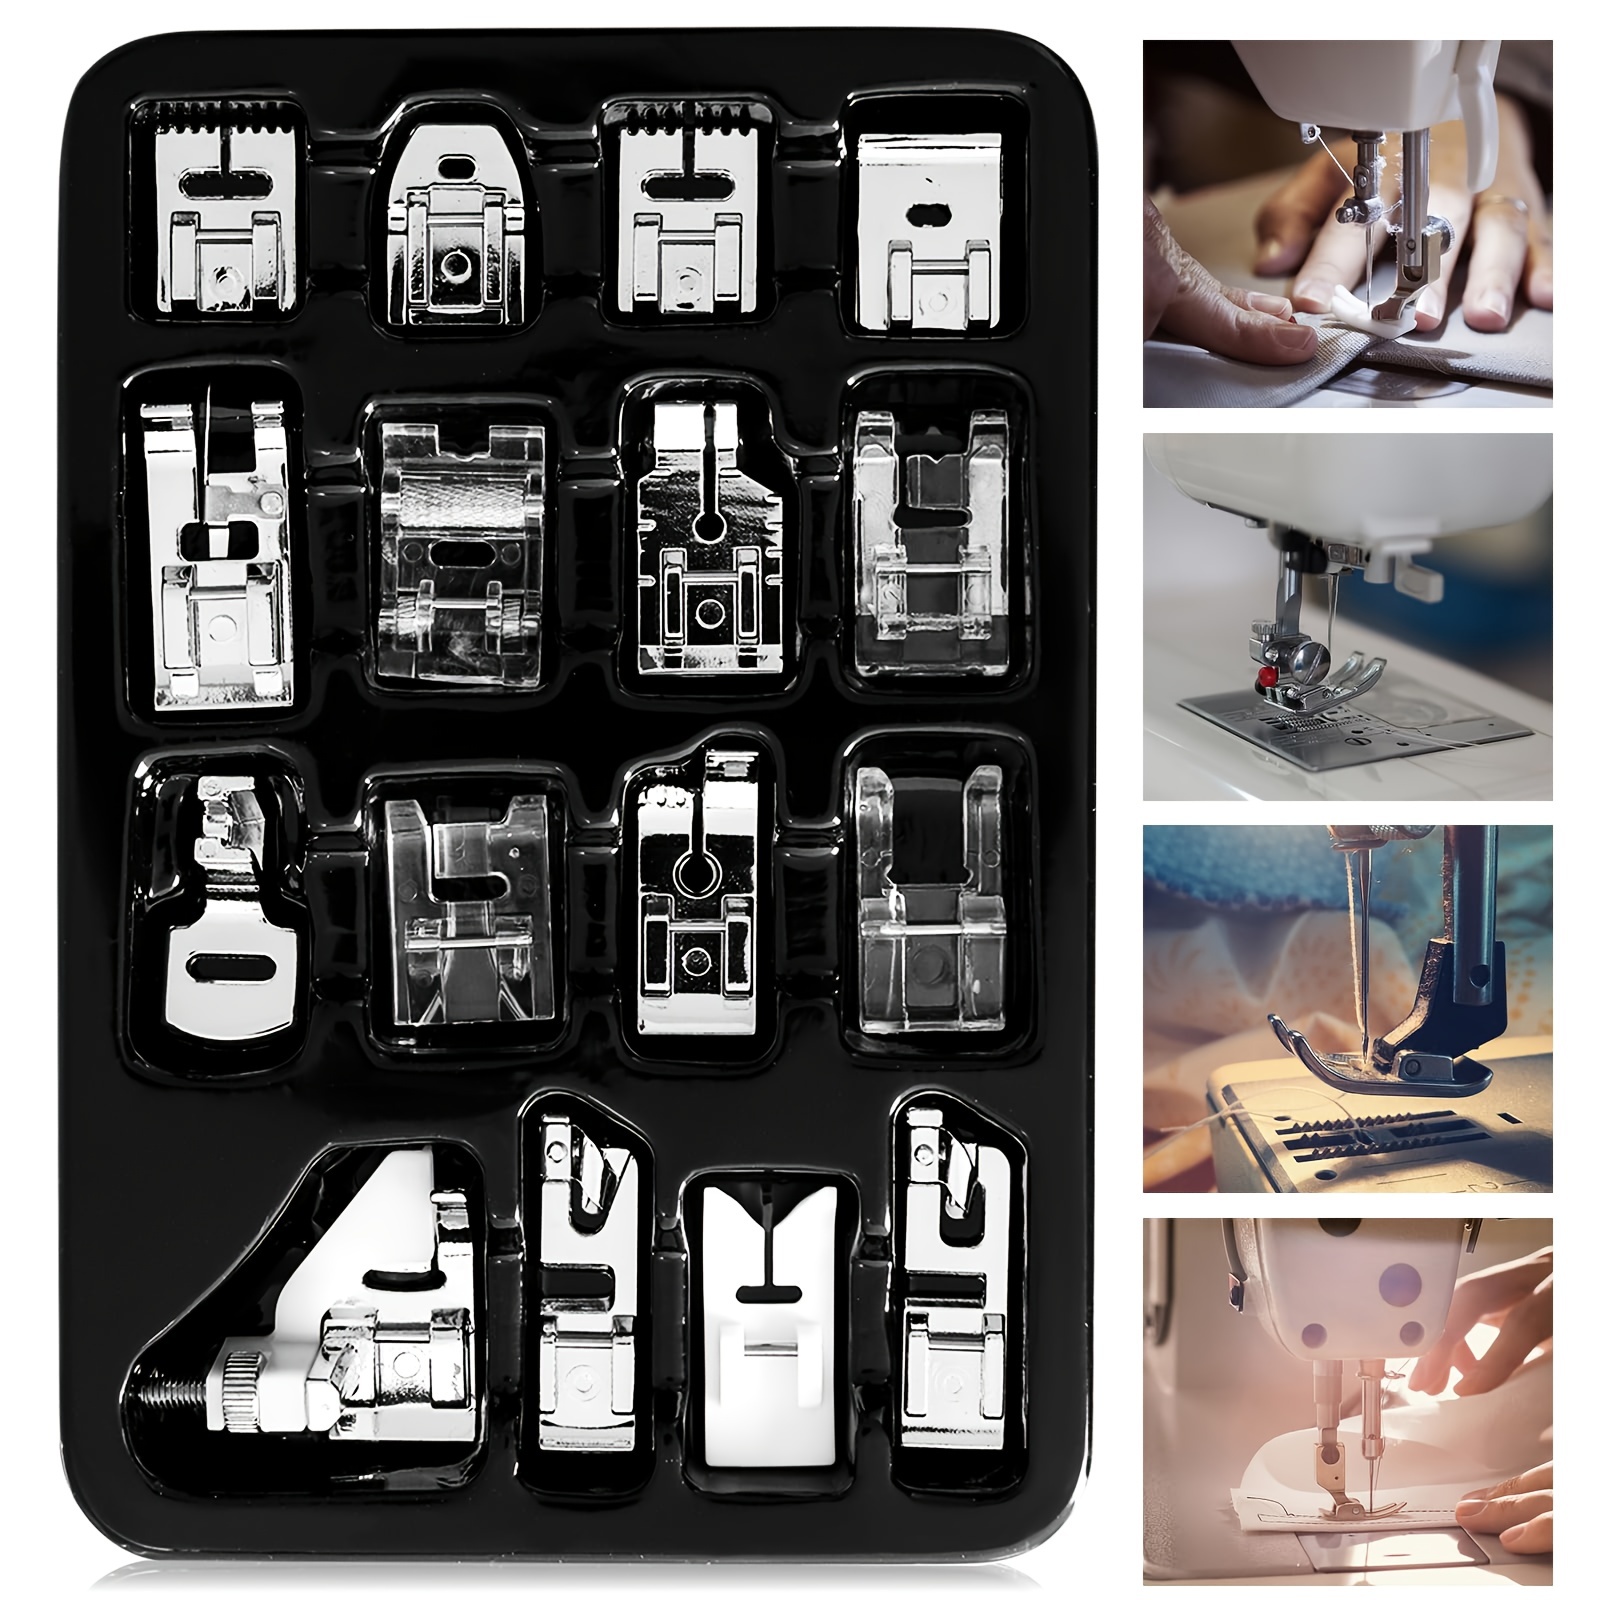 

16pcs Universal Sewing Machine Presser Feet Kit, Snap-on Adapter, Low Shank Accessories, Multi-functional For Home Sewing Projects, Storage Case Included